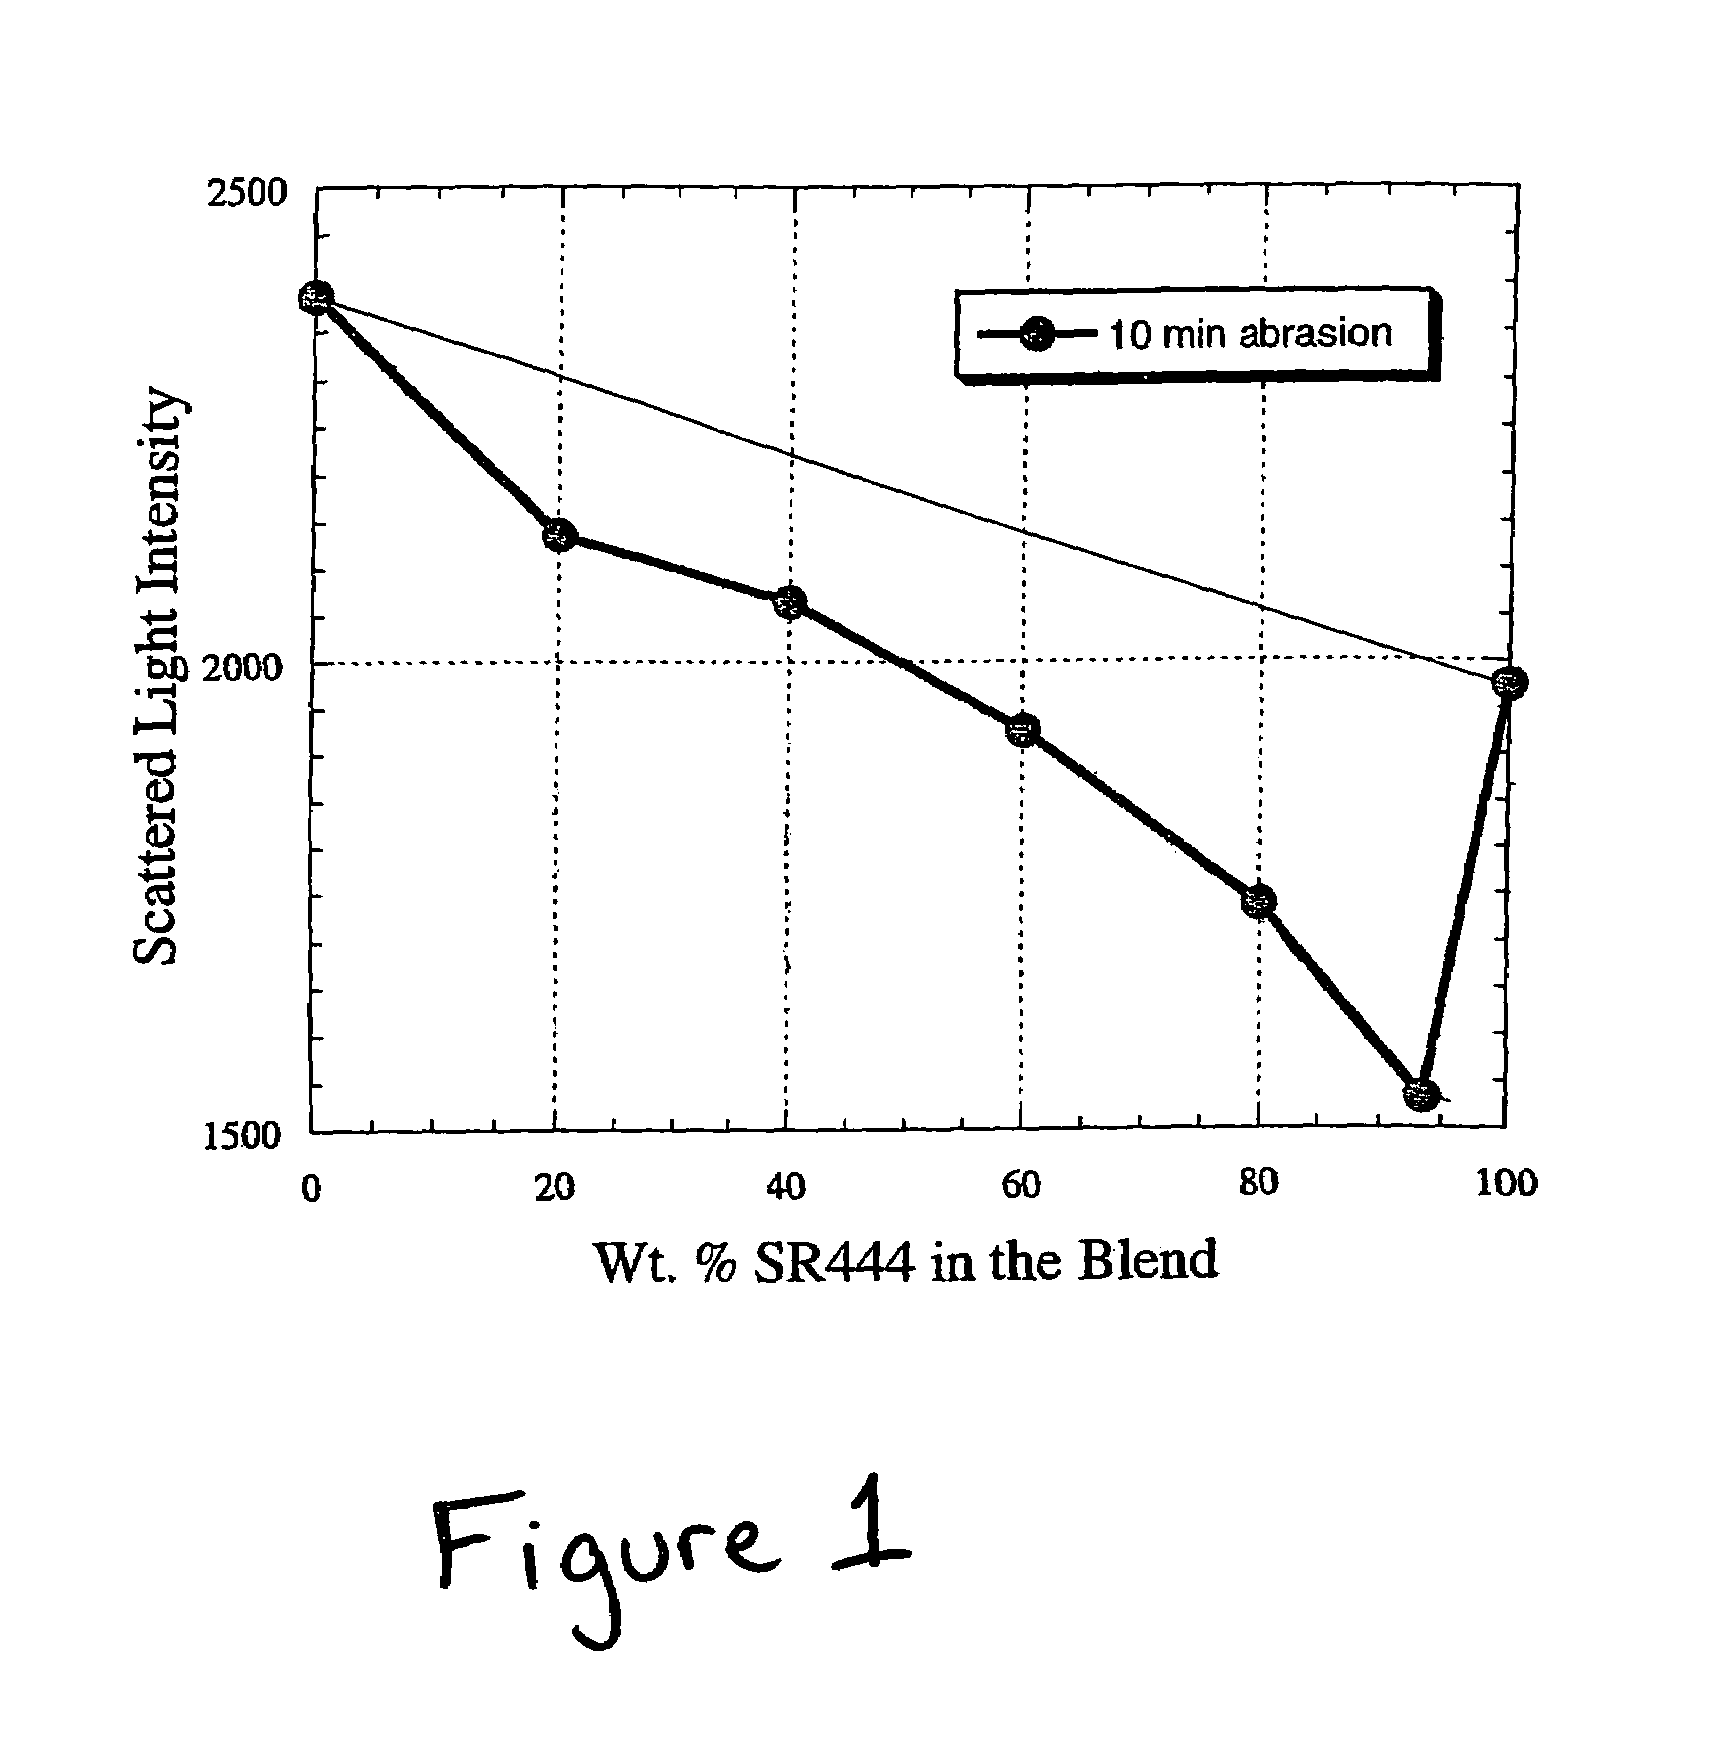 UV curable coating compositions and uses thereof